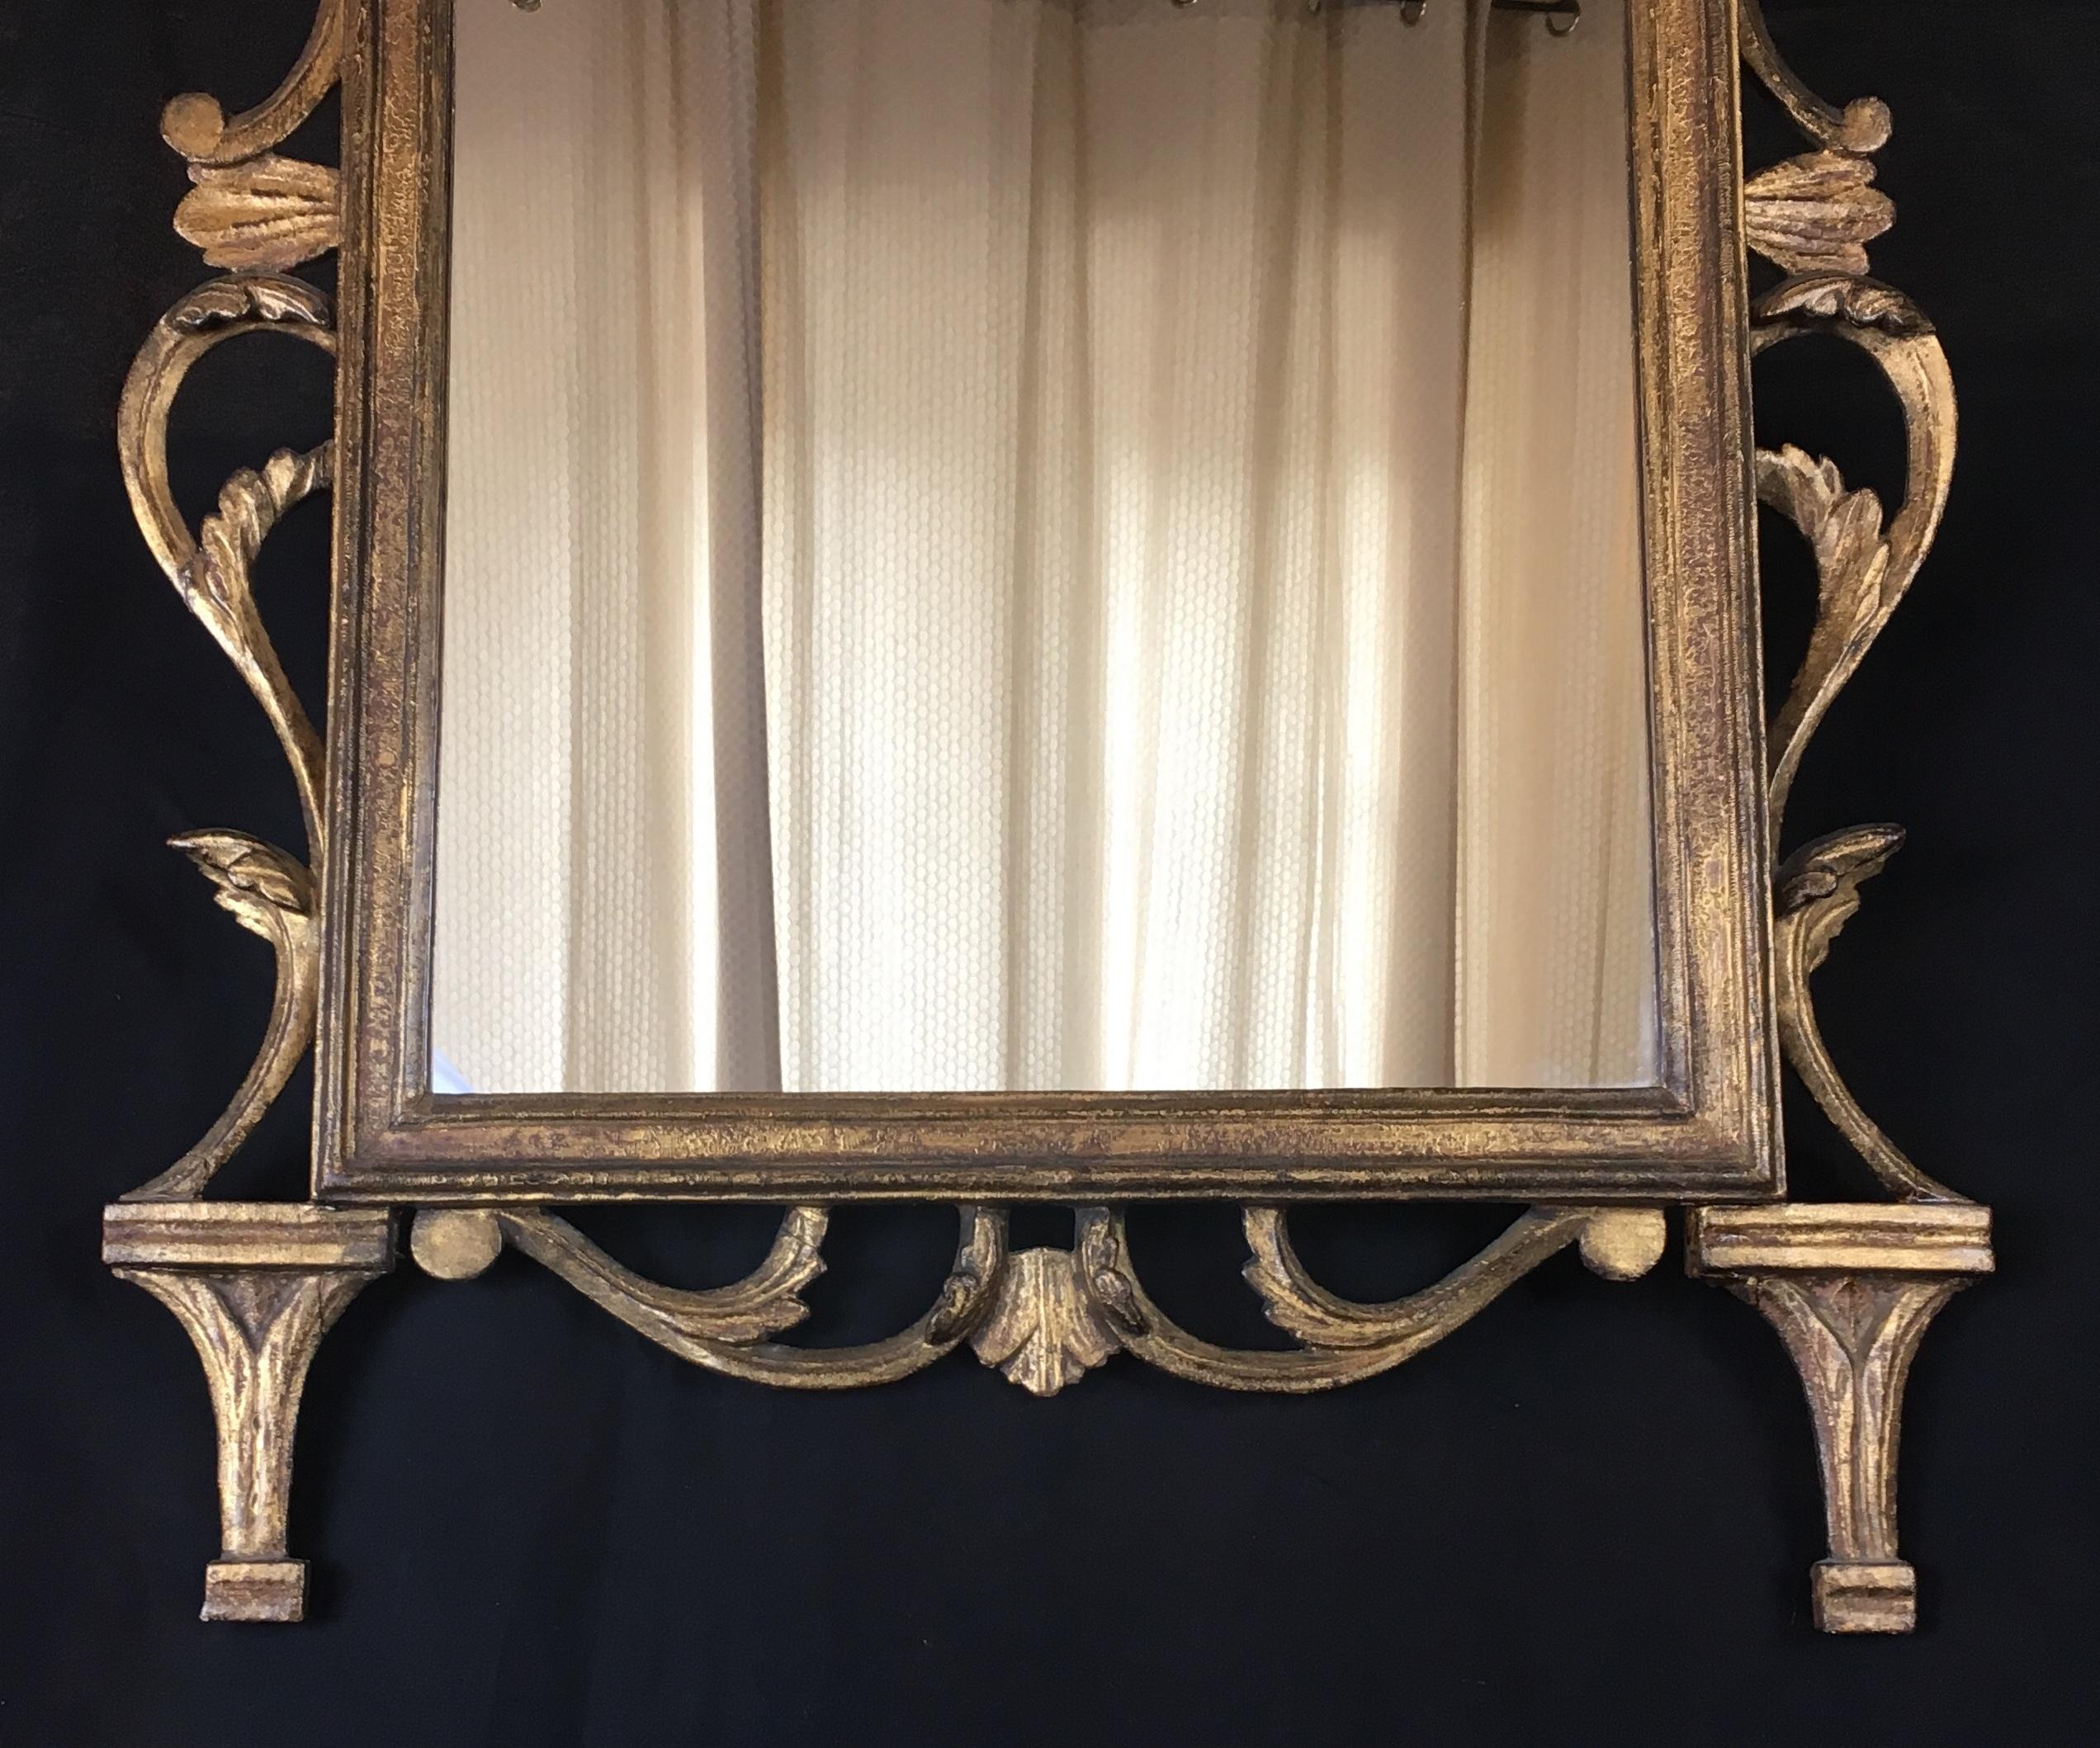 A fine 18th century Regency gilt wood mirror with a filigree border and pediment having a scalloped design.

Original gilding.
Fine hand-crafted carving. 

 